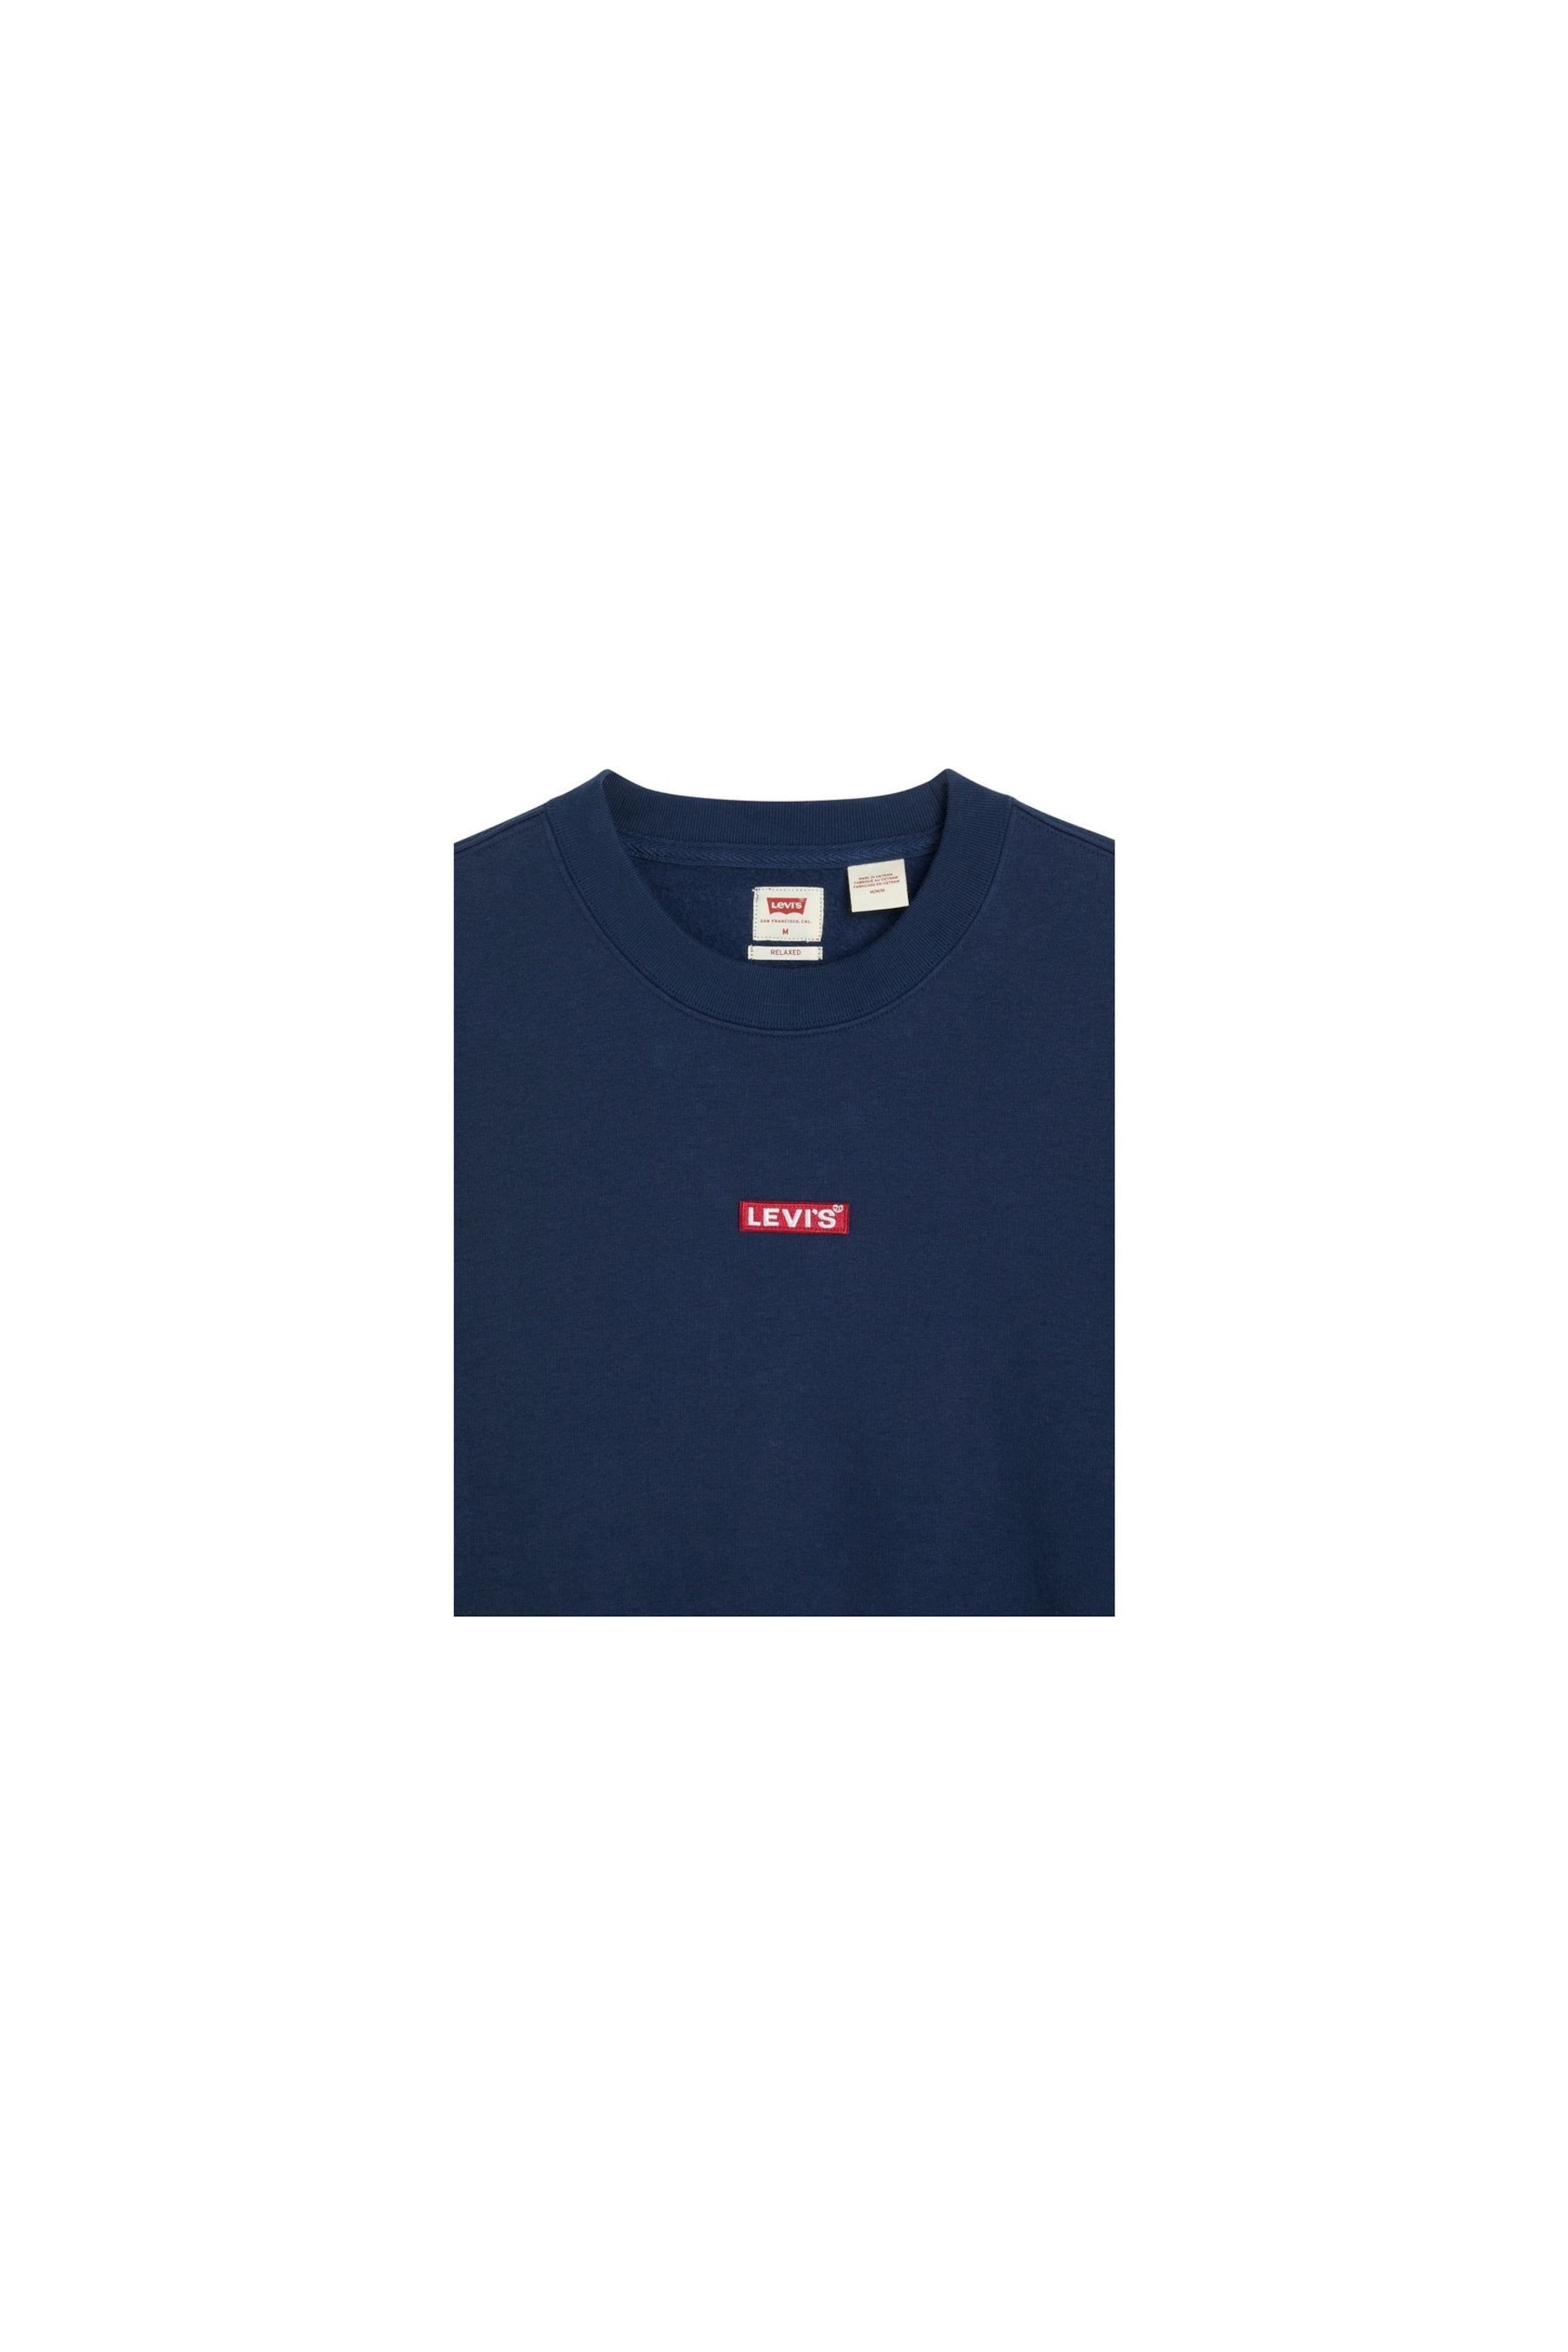 Levi's® Blue Relaxed Baby Tab  Sweatshirt - Image 5 of 5